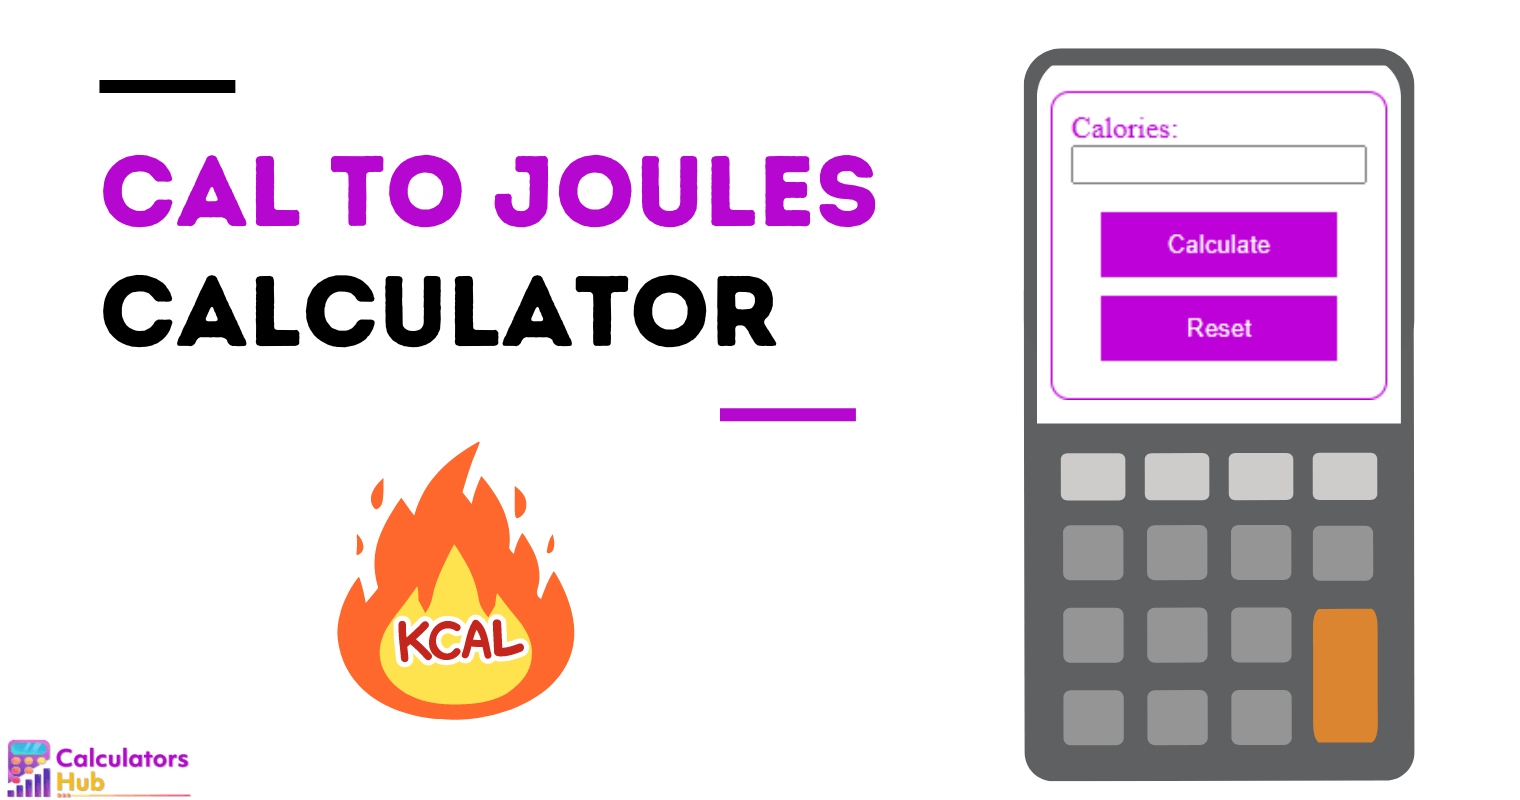 Cal to joules Calculator